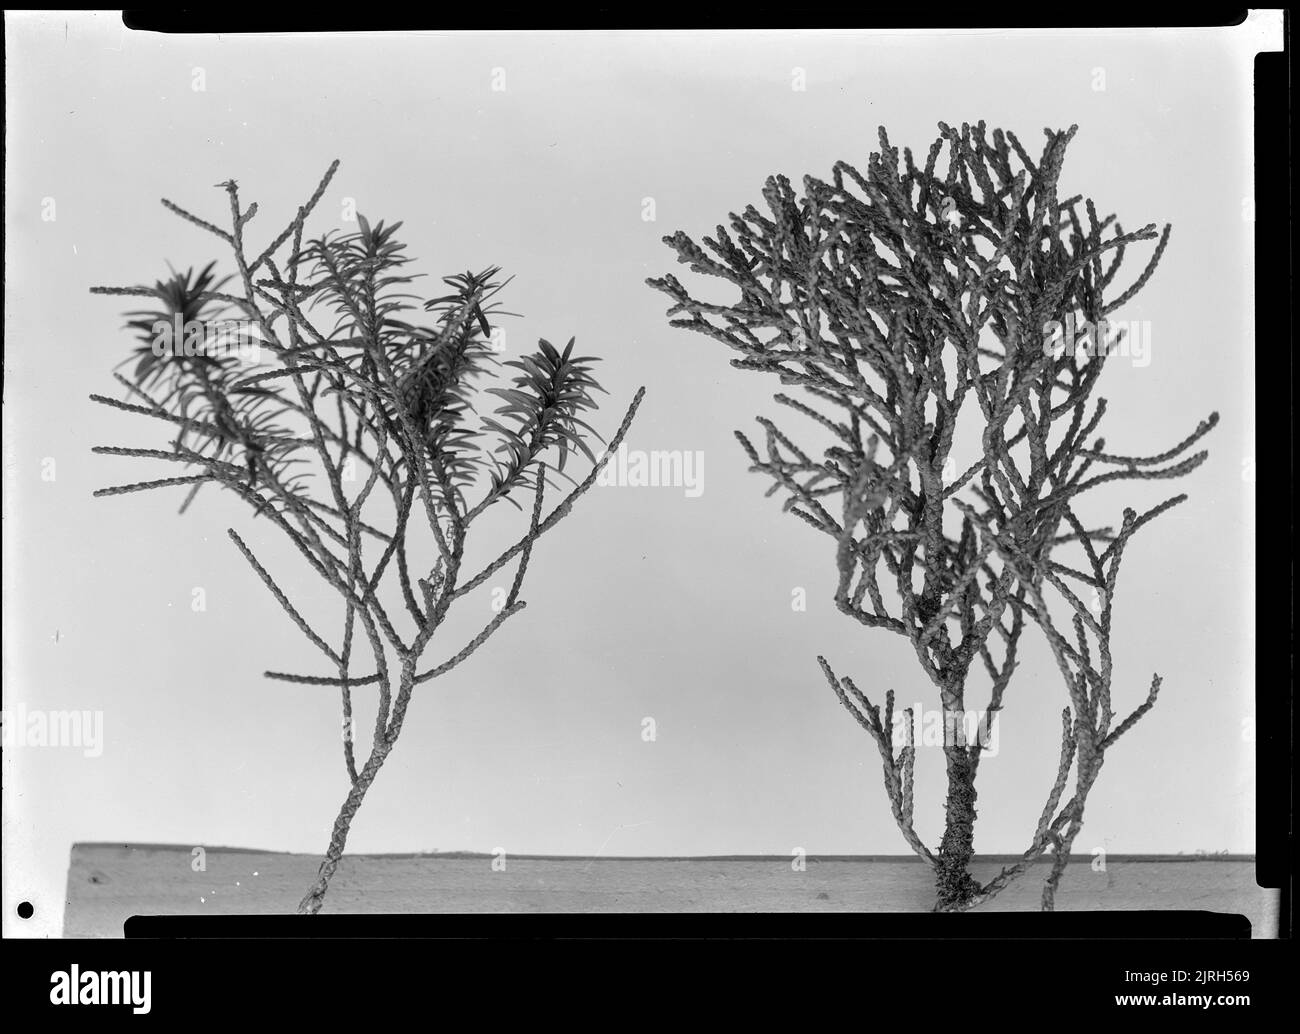 Juvenile and mature foliage of the only tree of Dacrydium biforme known in this part of Tararuas, 21 September 1929 - 22 September 1929, by Leslie Adkin. Gift of G. L. Adkin family estate, 1964. Stock Photo